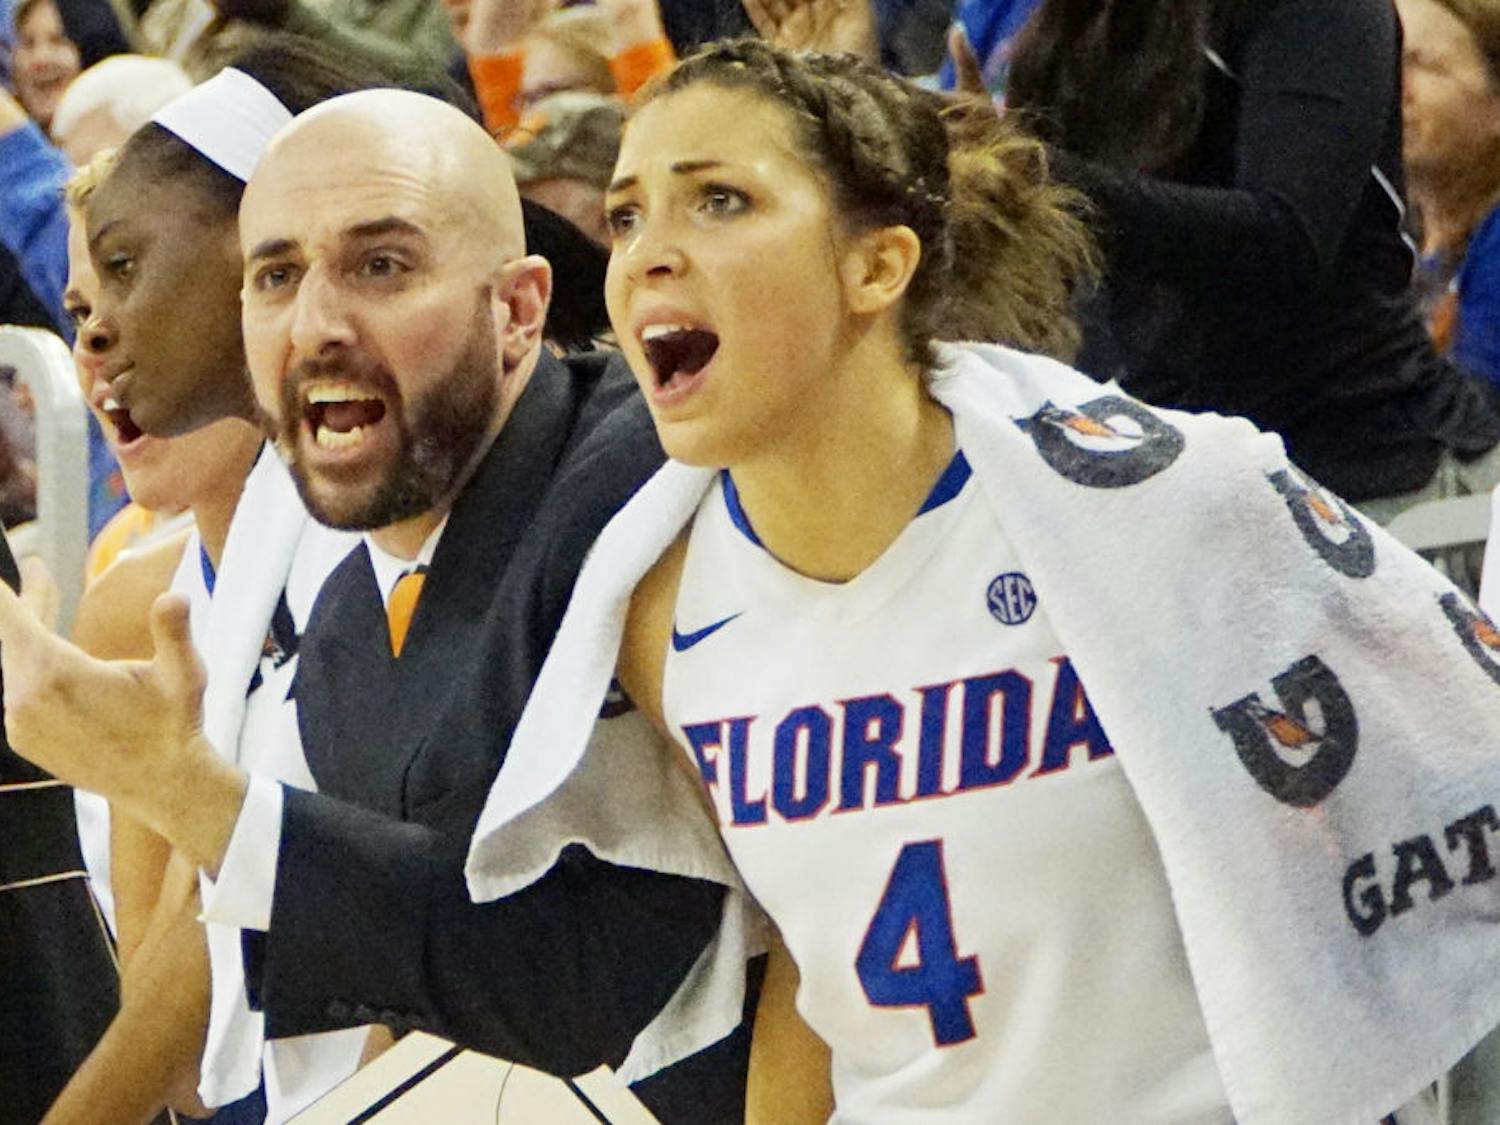 UF guard Carlie Needles (right) and women's basketball assistant coach Bill Ferrera react after a play during Florida's loss to Georgia on Jan. 14, 2016, in the O'Connell Center.